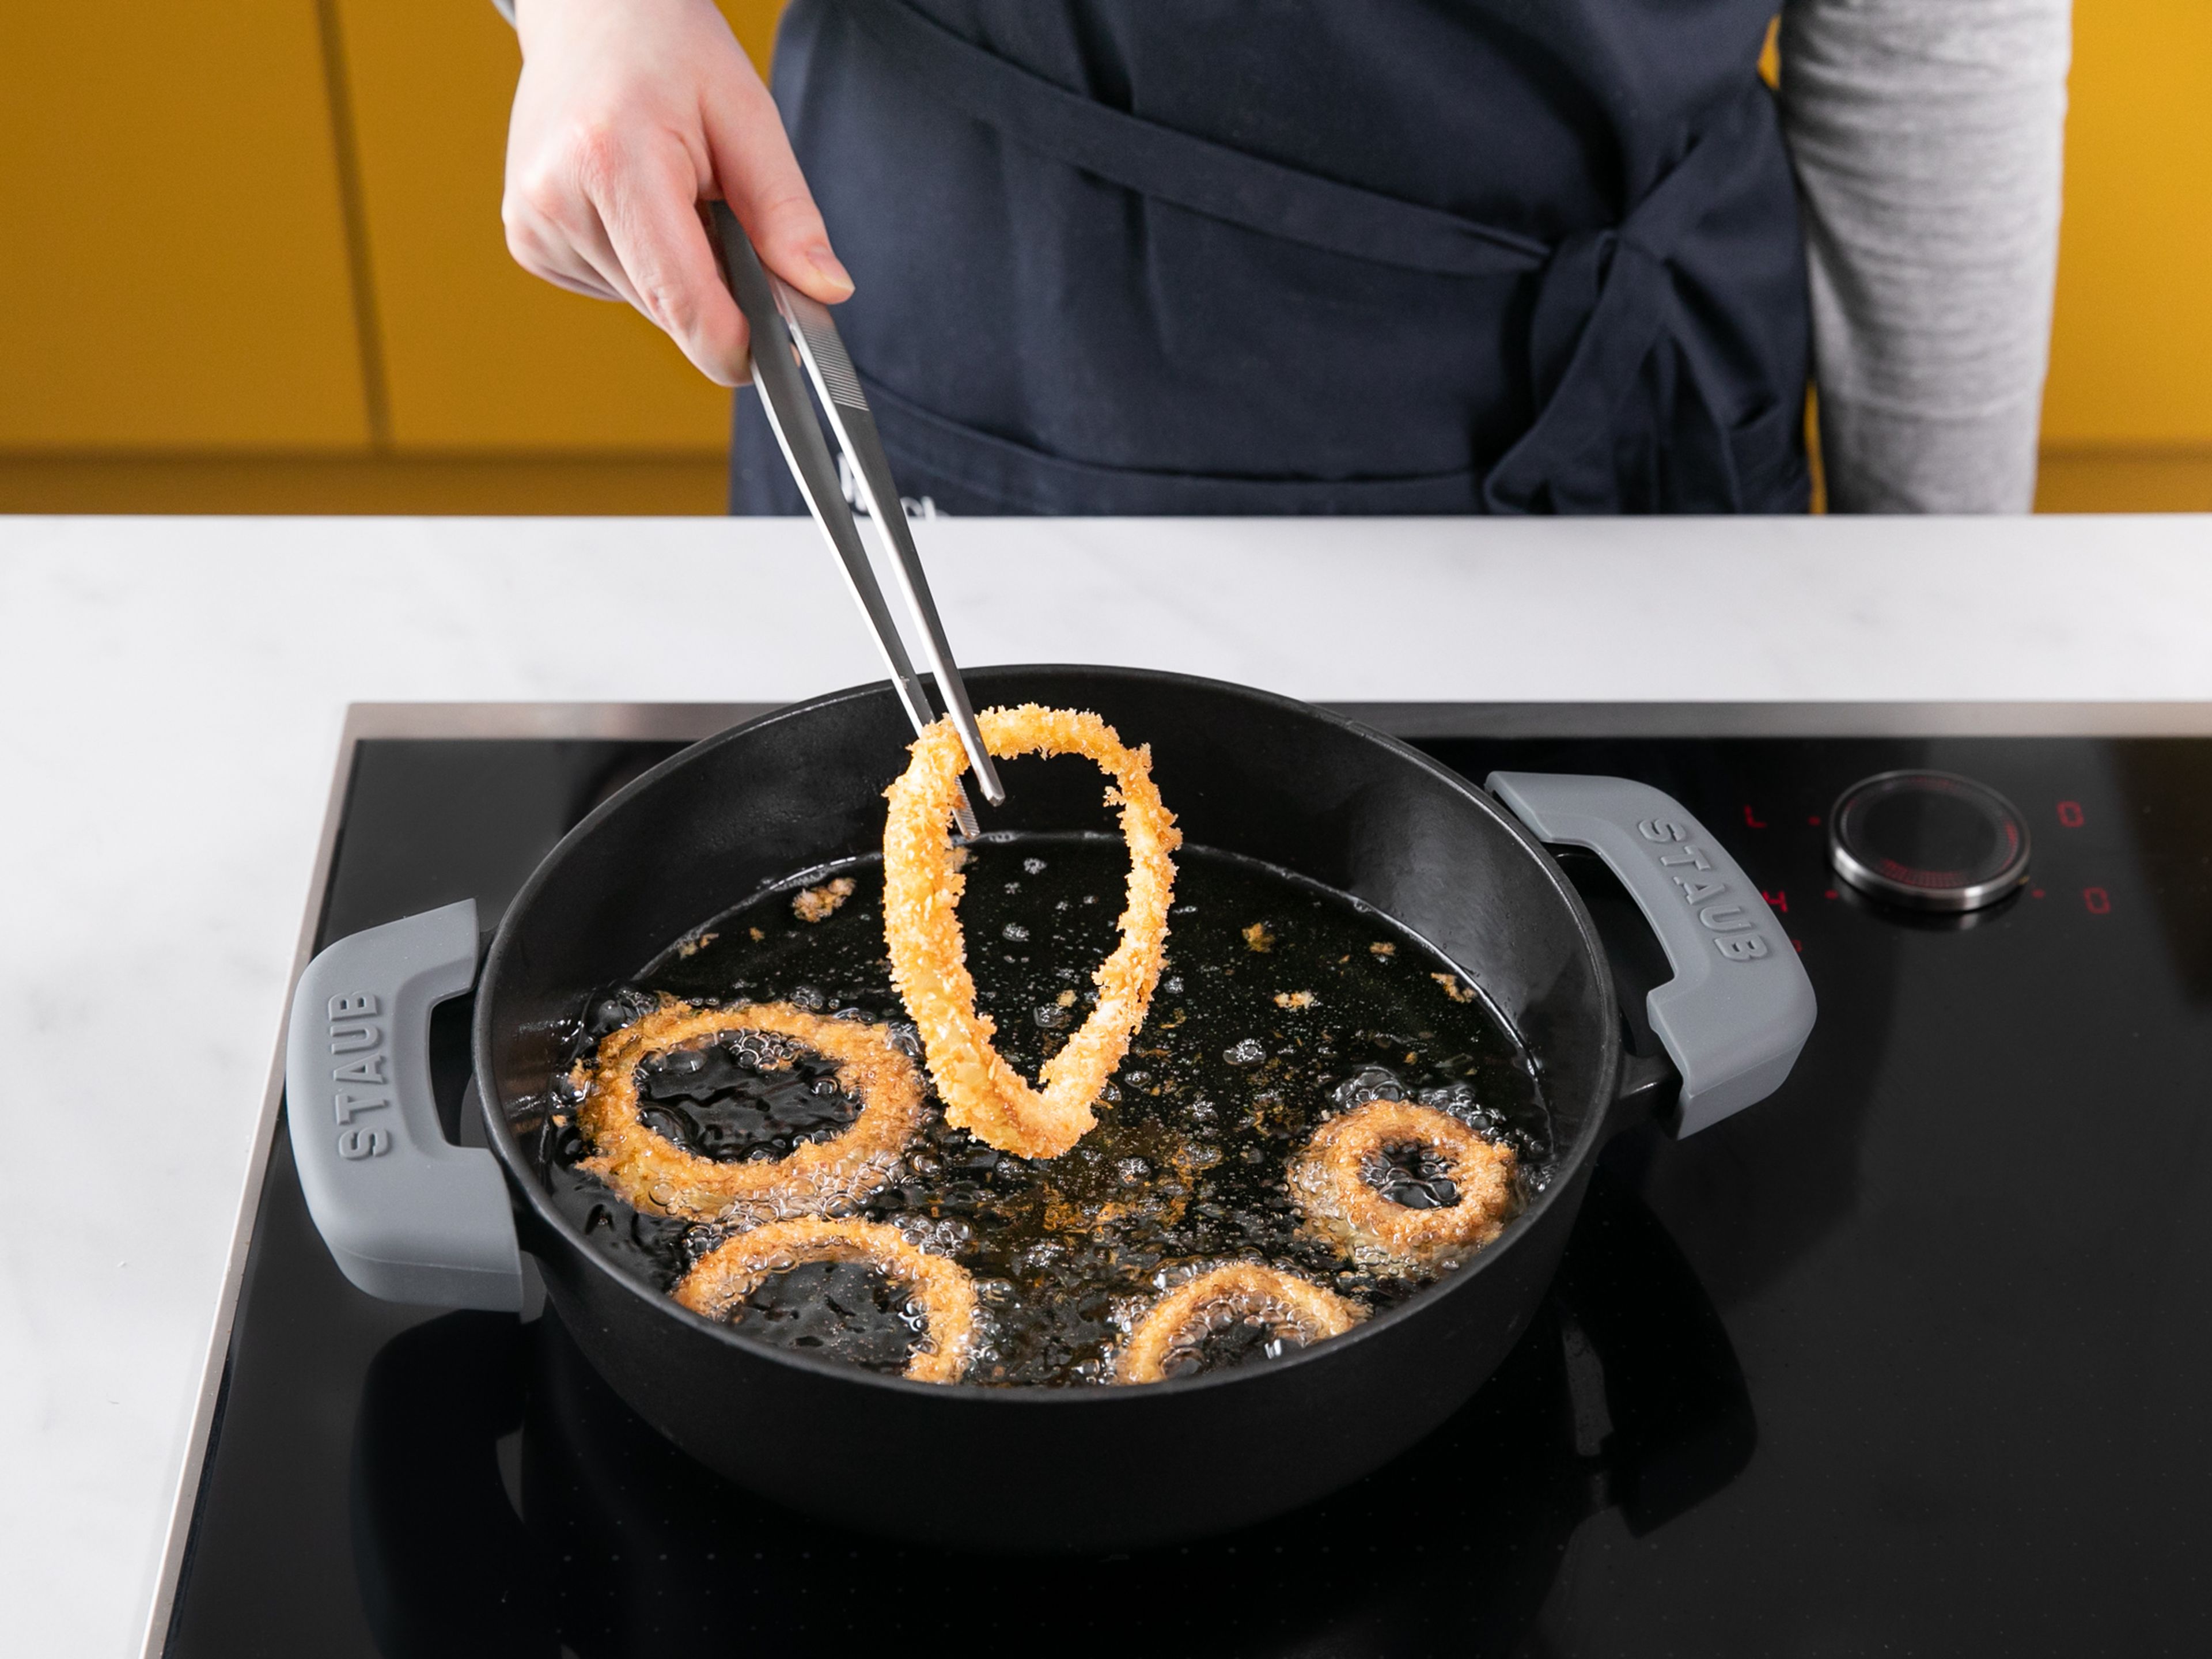 Add about 2.5-cm/1-in. of oil to a heavy-bottomed pot over medium-high heat. Let heat until the handle of a wooden spoon inserted into the pot forms bubbles all around it. Fry the onion rings in small batches until golden all over, approx. 5 min. Then transfer to a wire rack set inside a paper towel-lined baking sheet. Repeat with all onion rings.